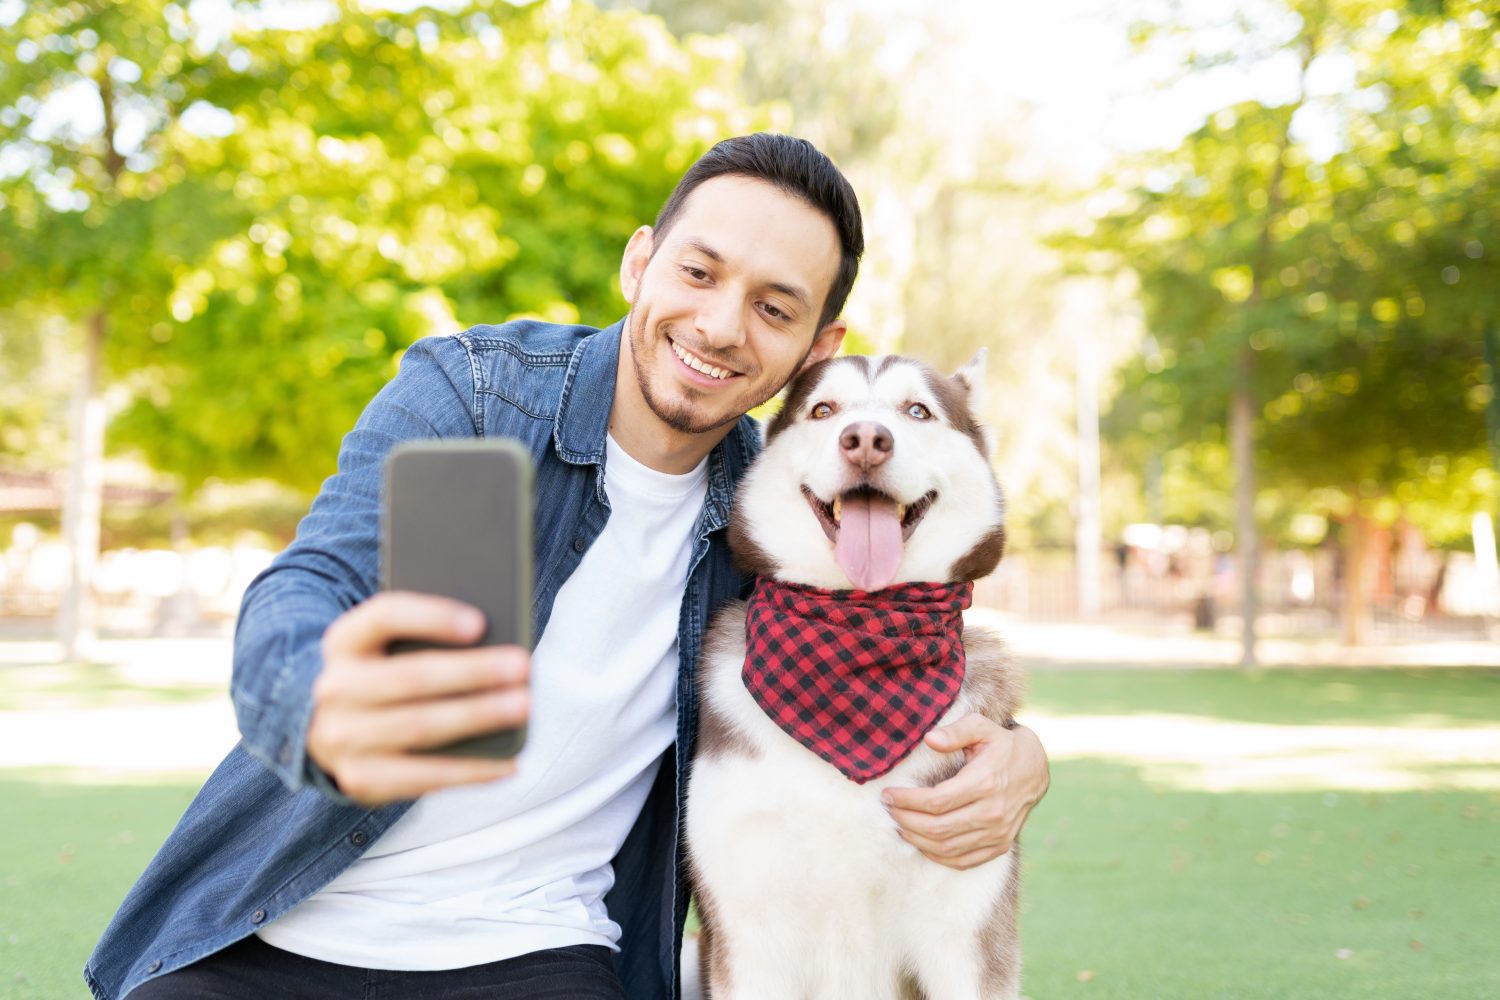 Front view of a good looking man in his 30s taking a photo with his beautiful dog wearing a bandana in the grass at the park